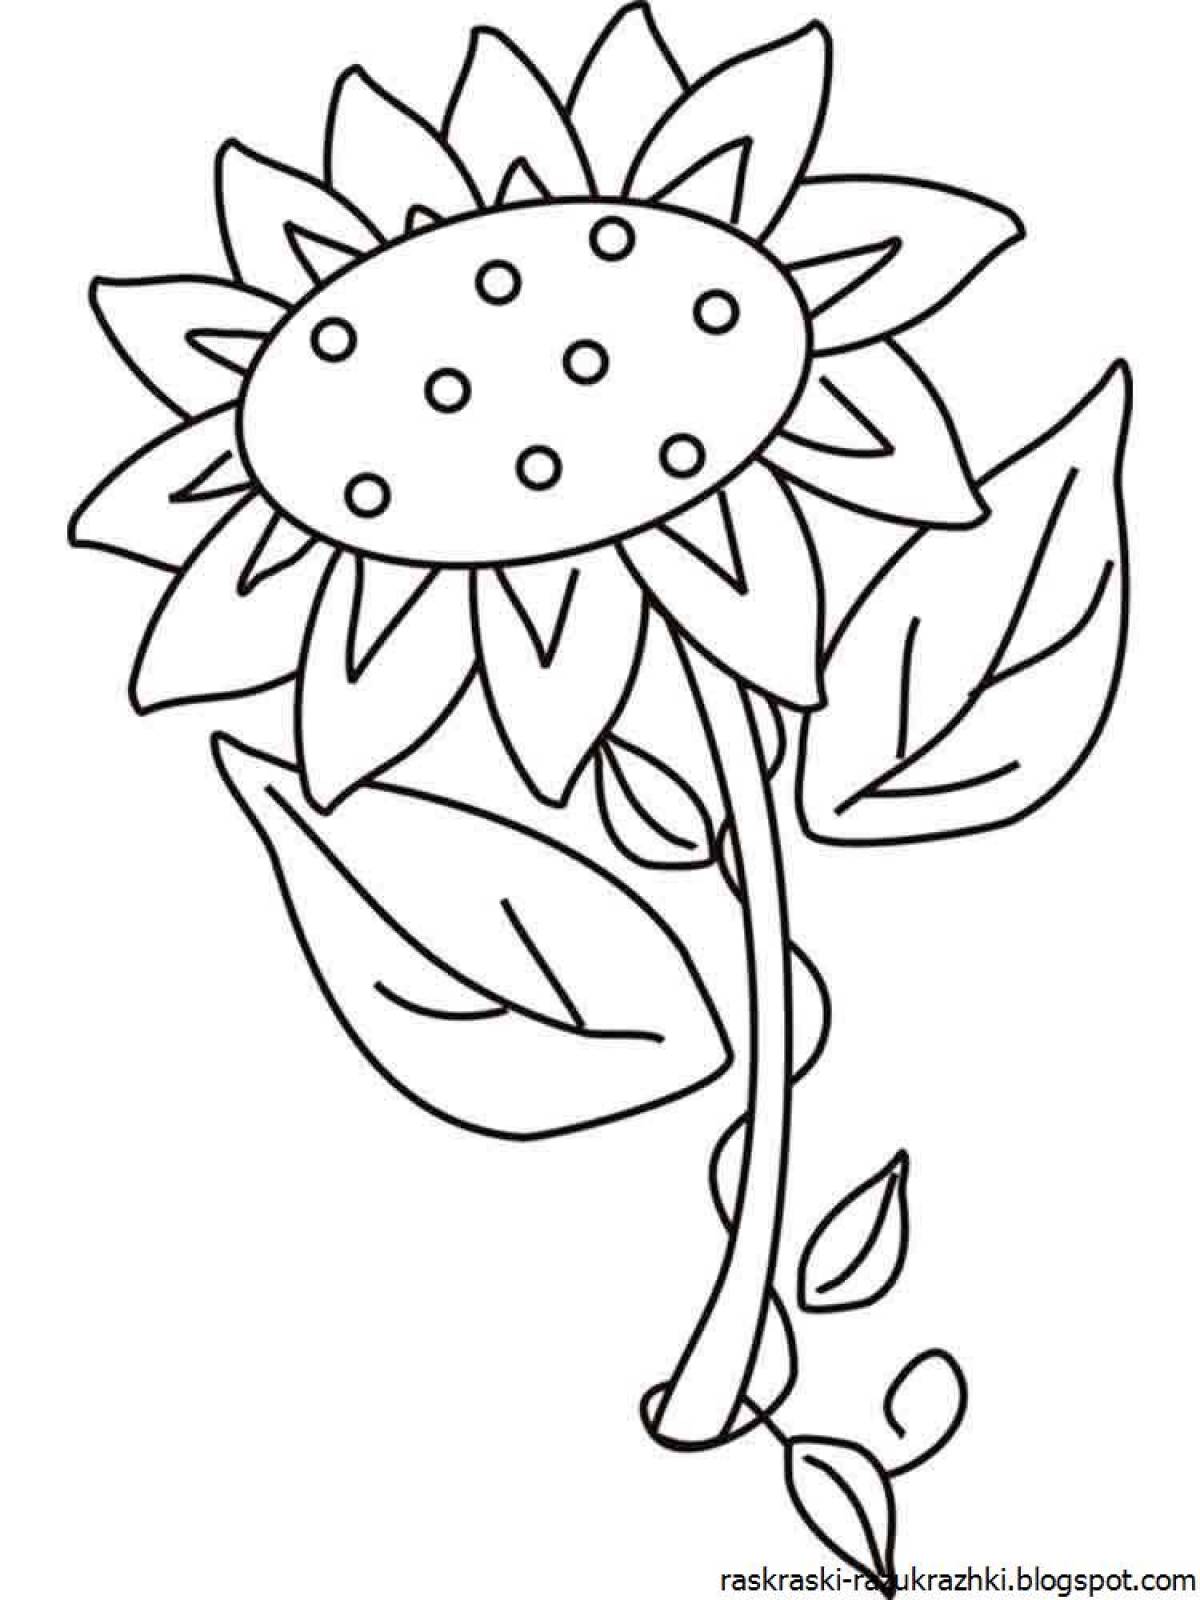 Colourful flowers coloring book for children 4-5 years old